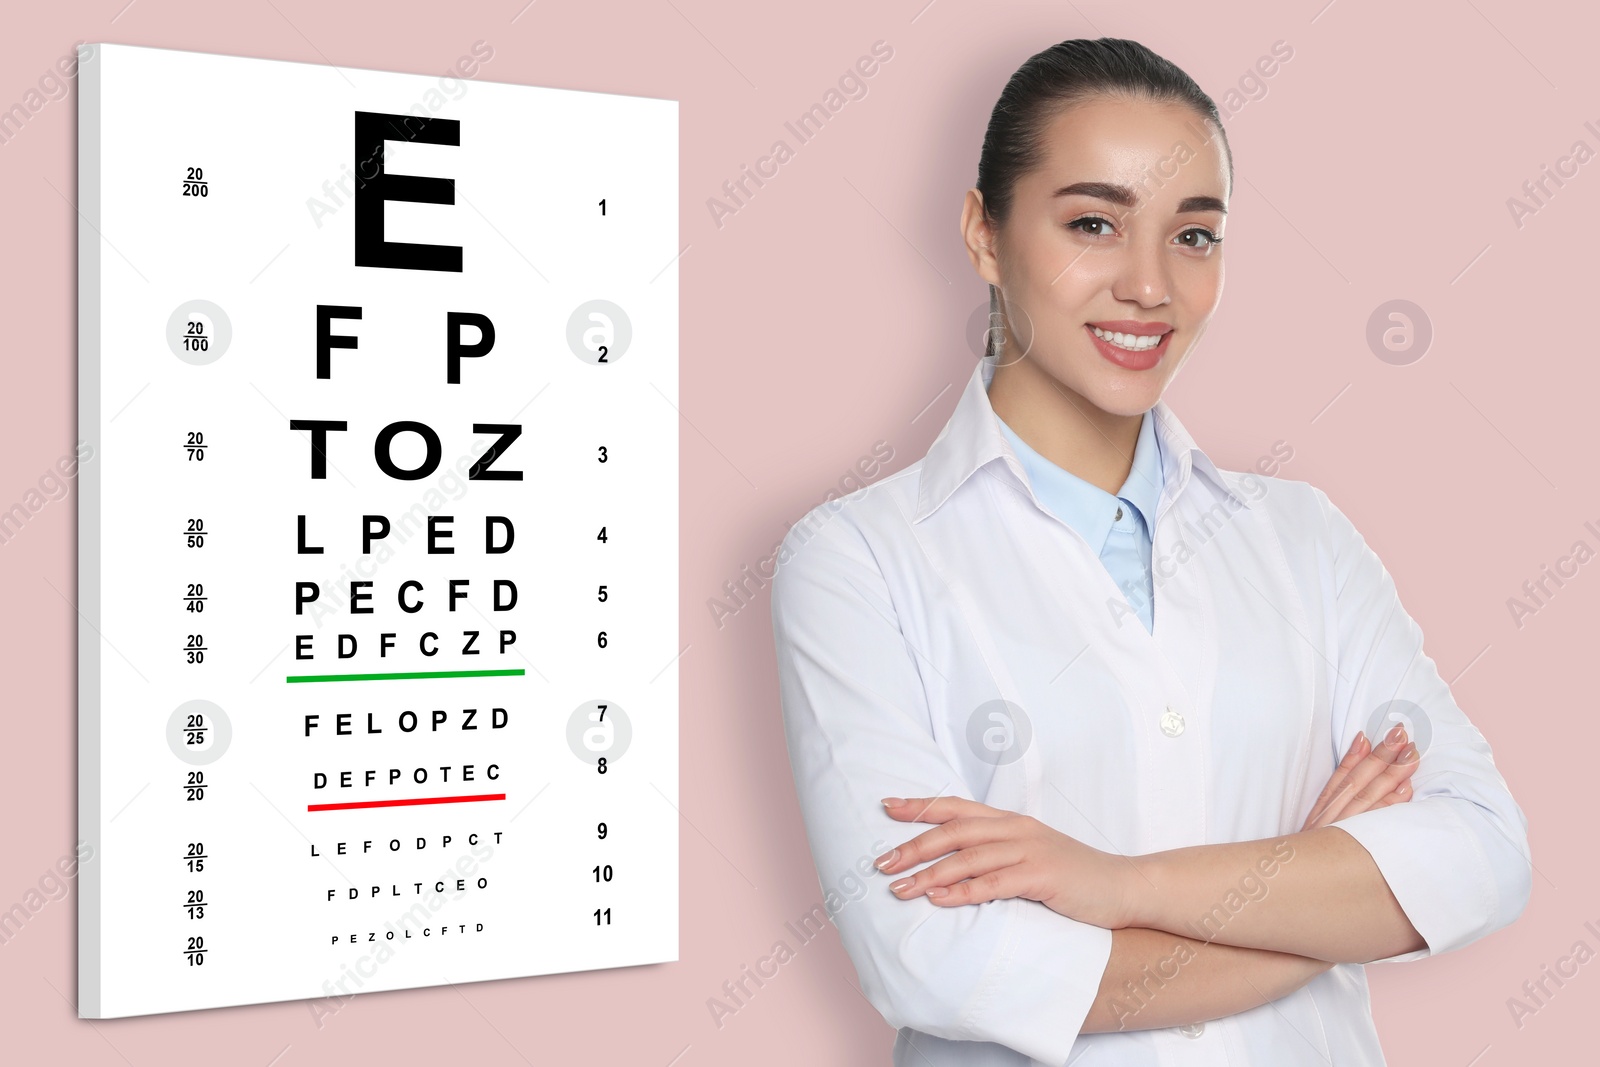 Image of Vision test. Ophthalmologist or optometrist near eye chart, pink background